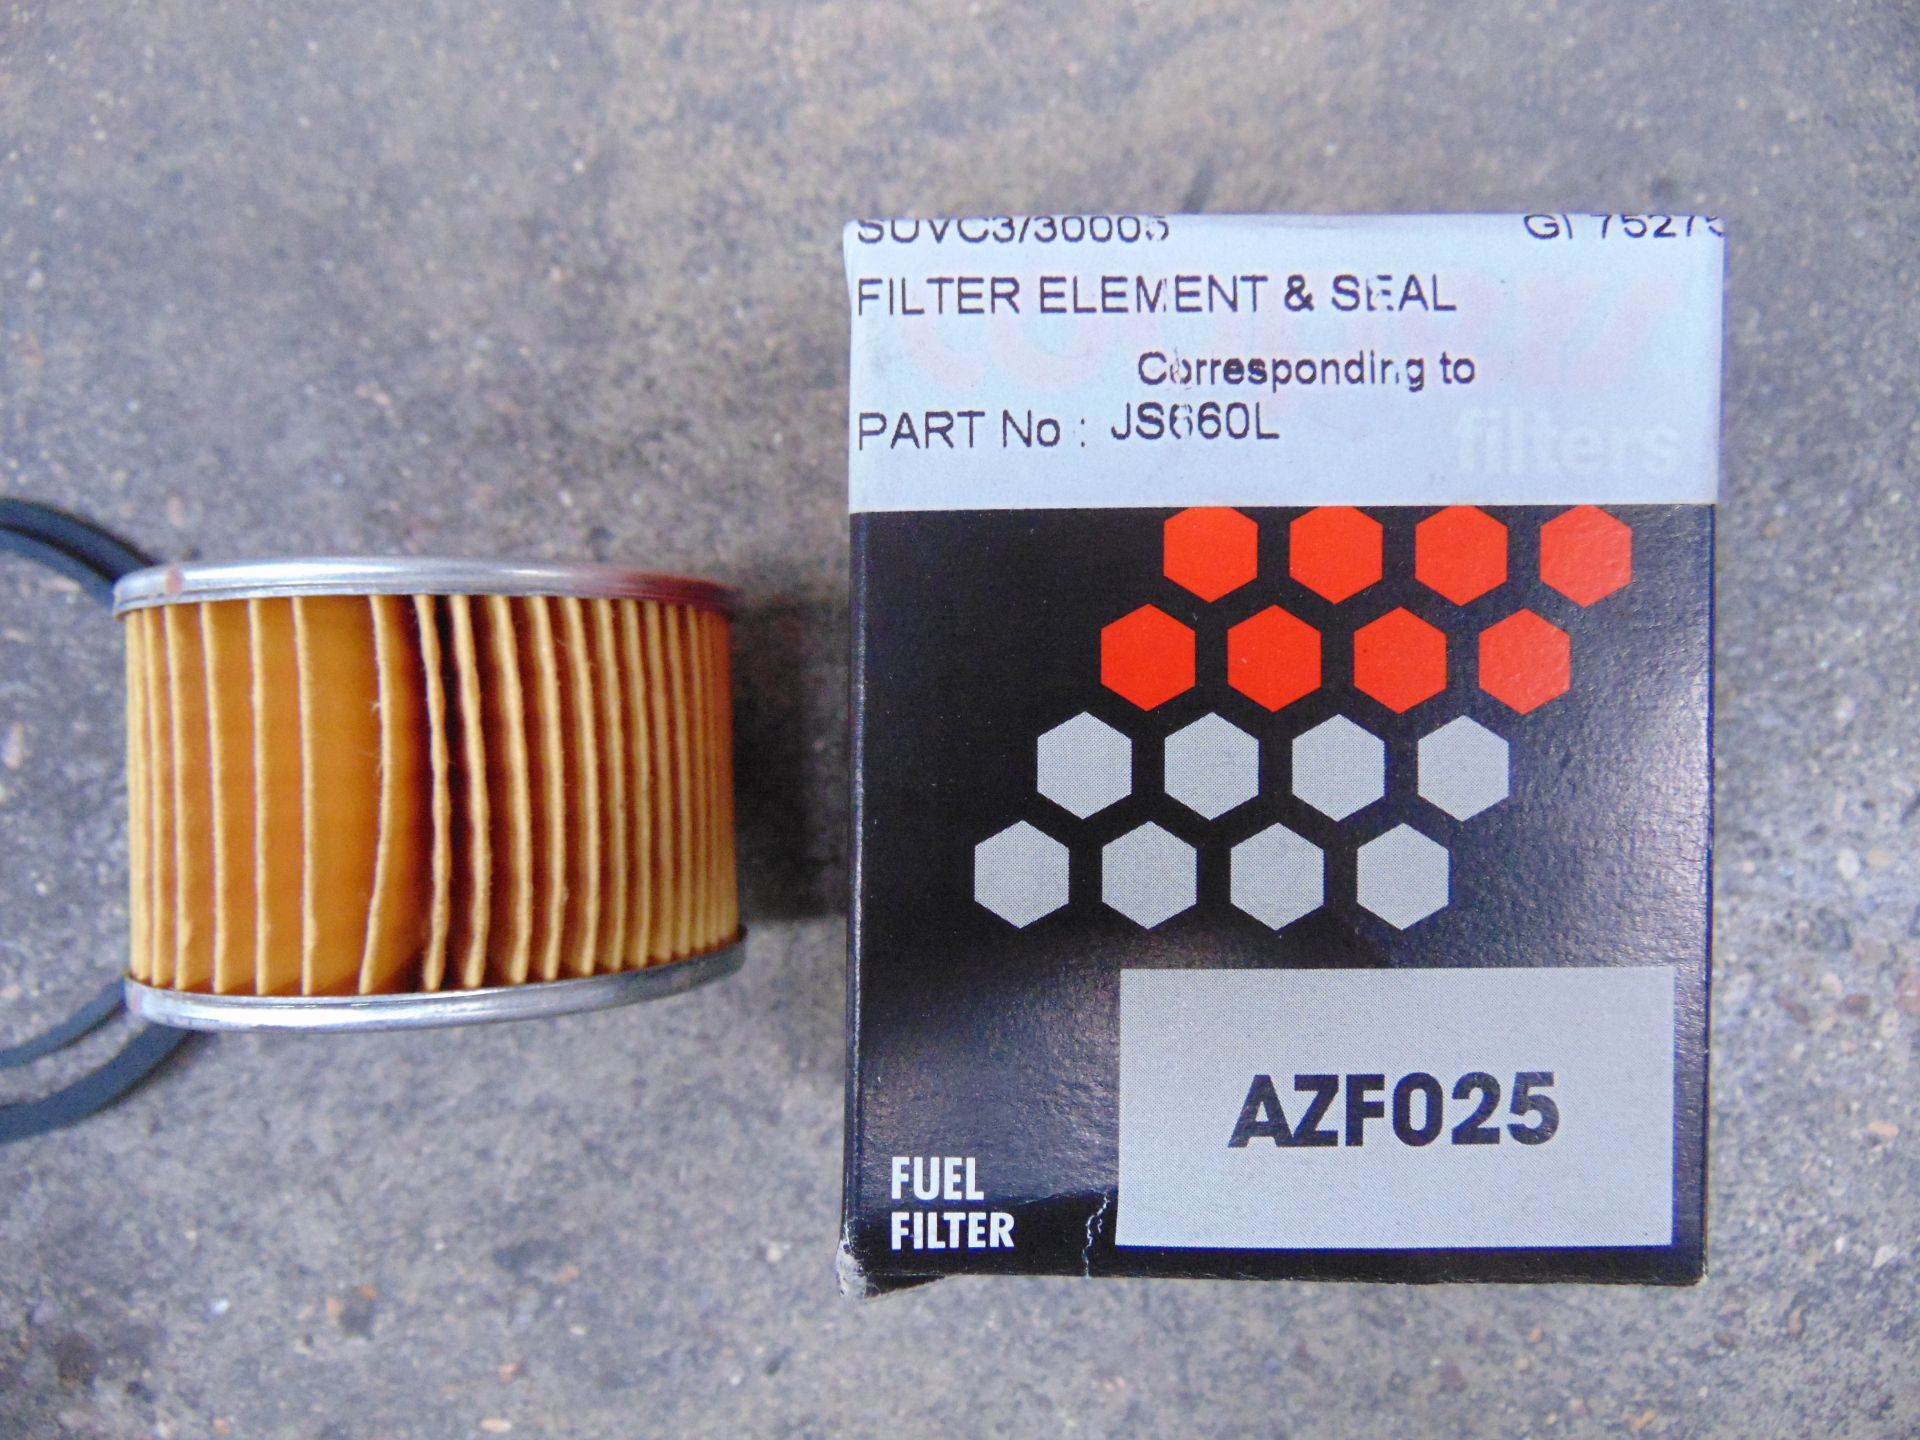 200 x Land Rover Coopers AZF025 Fuel Filters - Image 3 of 3